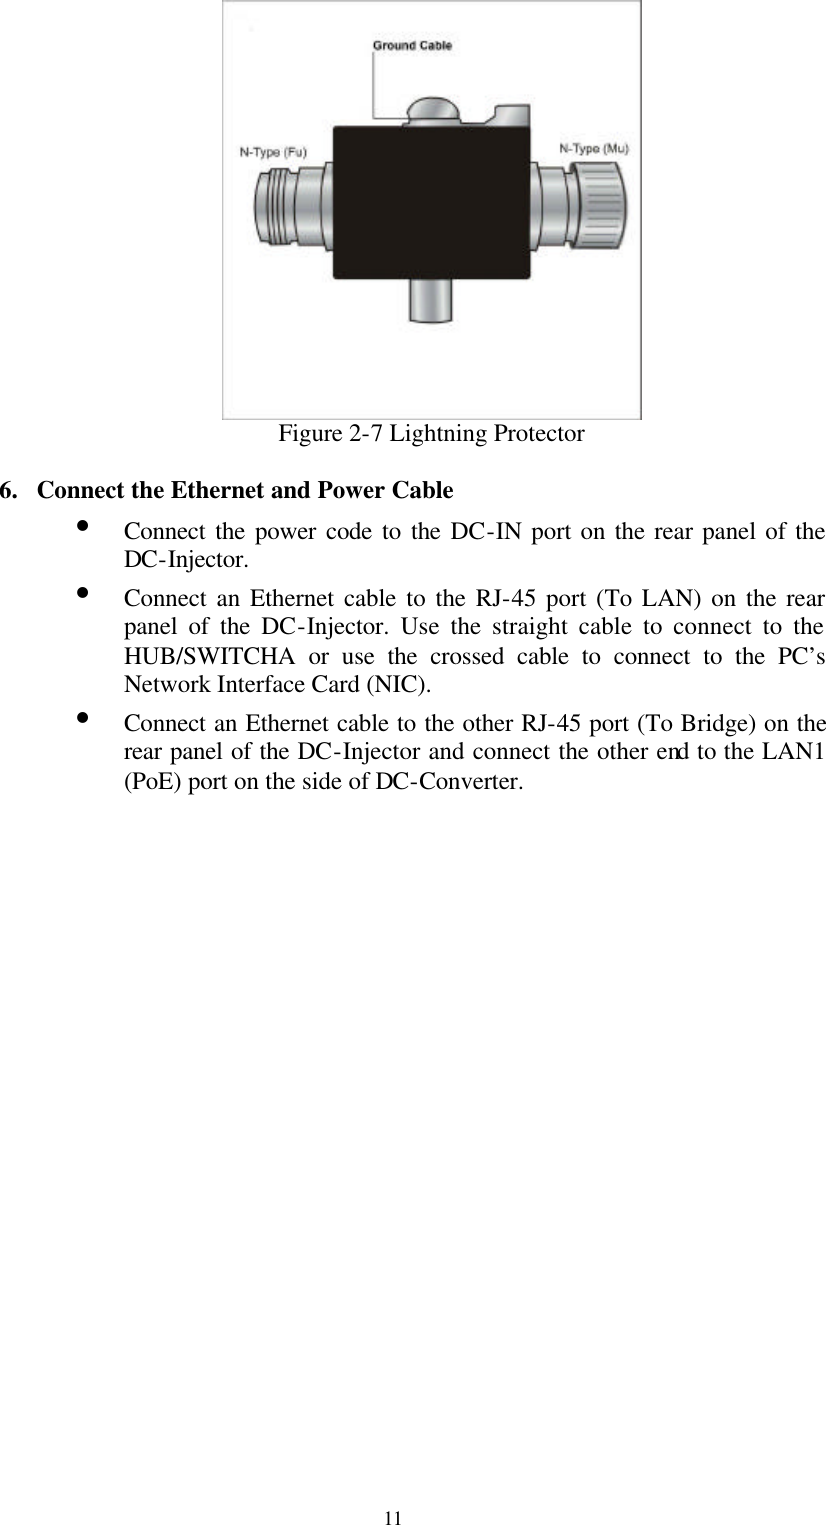  11  Figure 2-7 Lightning Protector  6. Connect the Ethernet and Power Cable Ÿ Connect the power code to the DC-IN port on the rear panel of the DC-Injector. Ÿ Connect an Ethernet cable to the RJ-45 port (To LAN) on the rear panel of the DC-Injector. Use the straight cable to connect to the HUB/SWITCHA or use the crossed cable to connect to the PC’s Network Interface Card (NIC). Ÿ Connect an Ethernet cable to the other RJ-45 port (To Bridge) on the rear panel of the DC-Injector and connect the other end to the LAN1 (PoE) port on the side of DC-Converter.                       